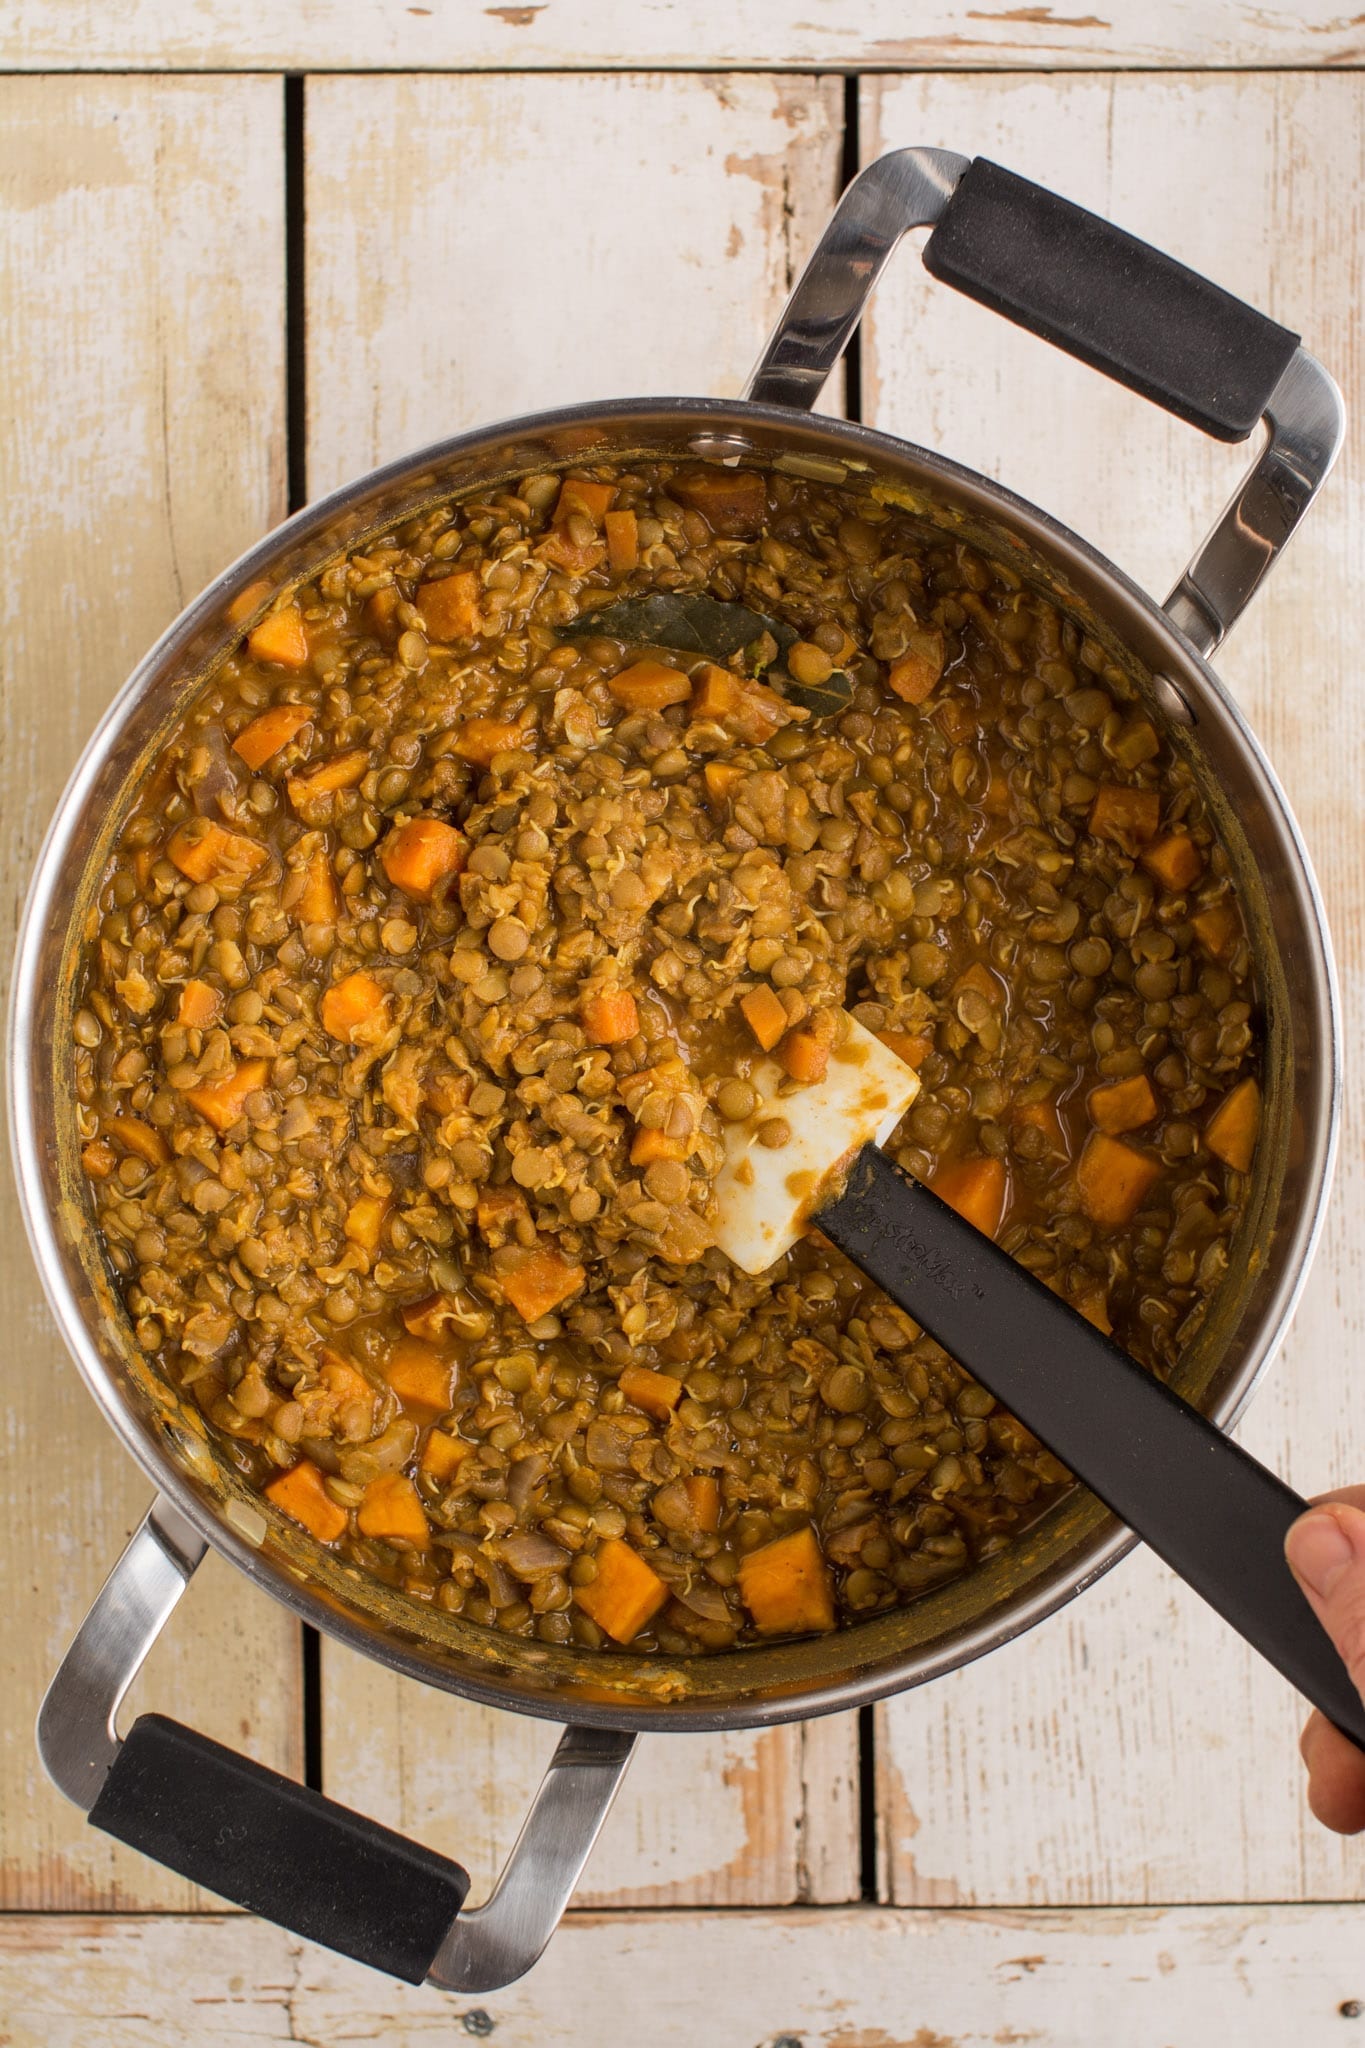 Delicious sweet potato lentil stew is perfect for a weeknight dinner. Ready in 30 minutes. Ideal for meal prepping.